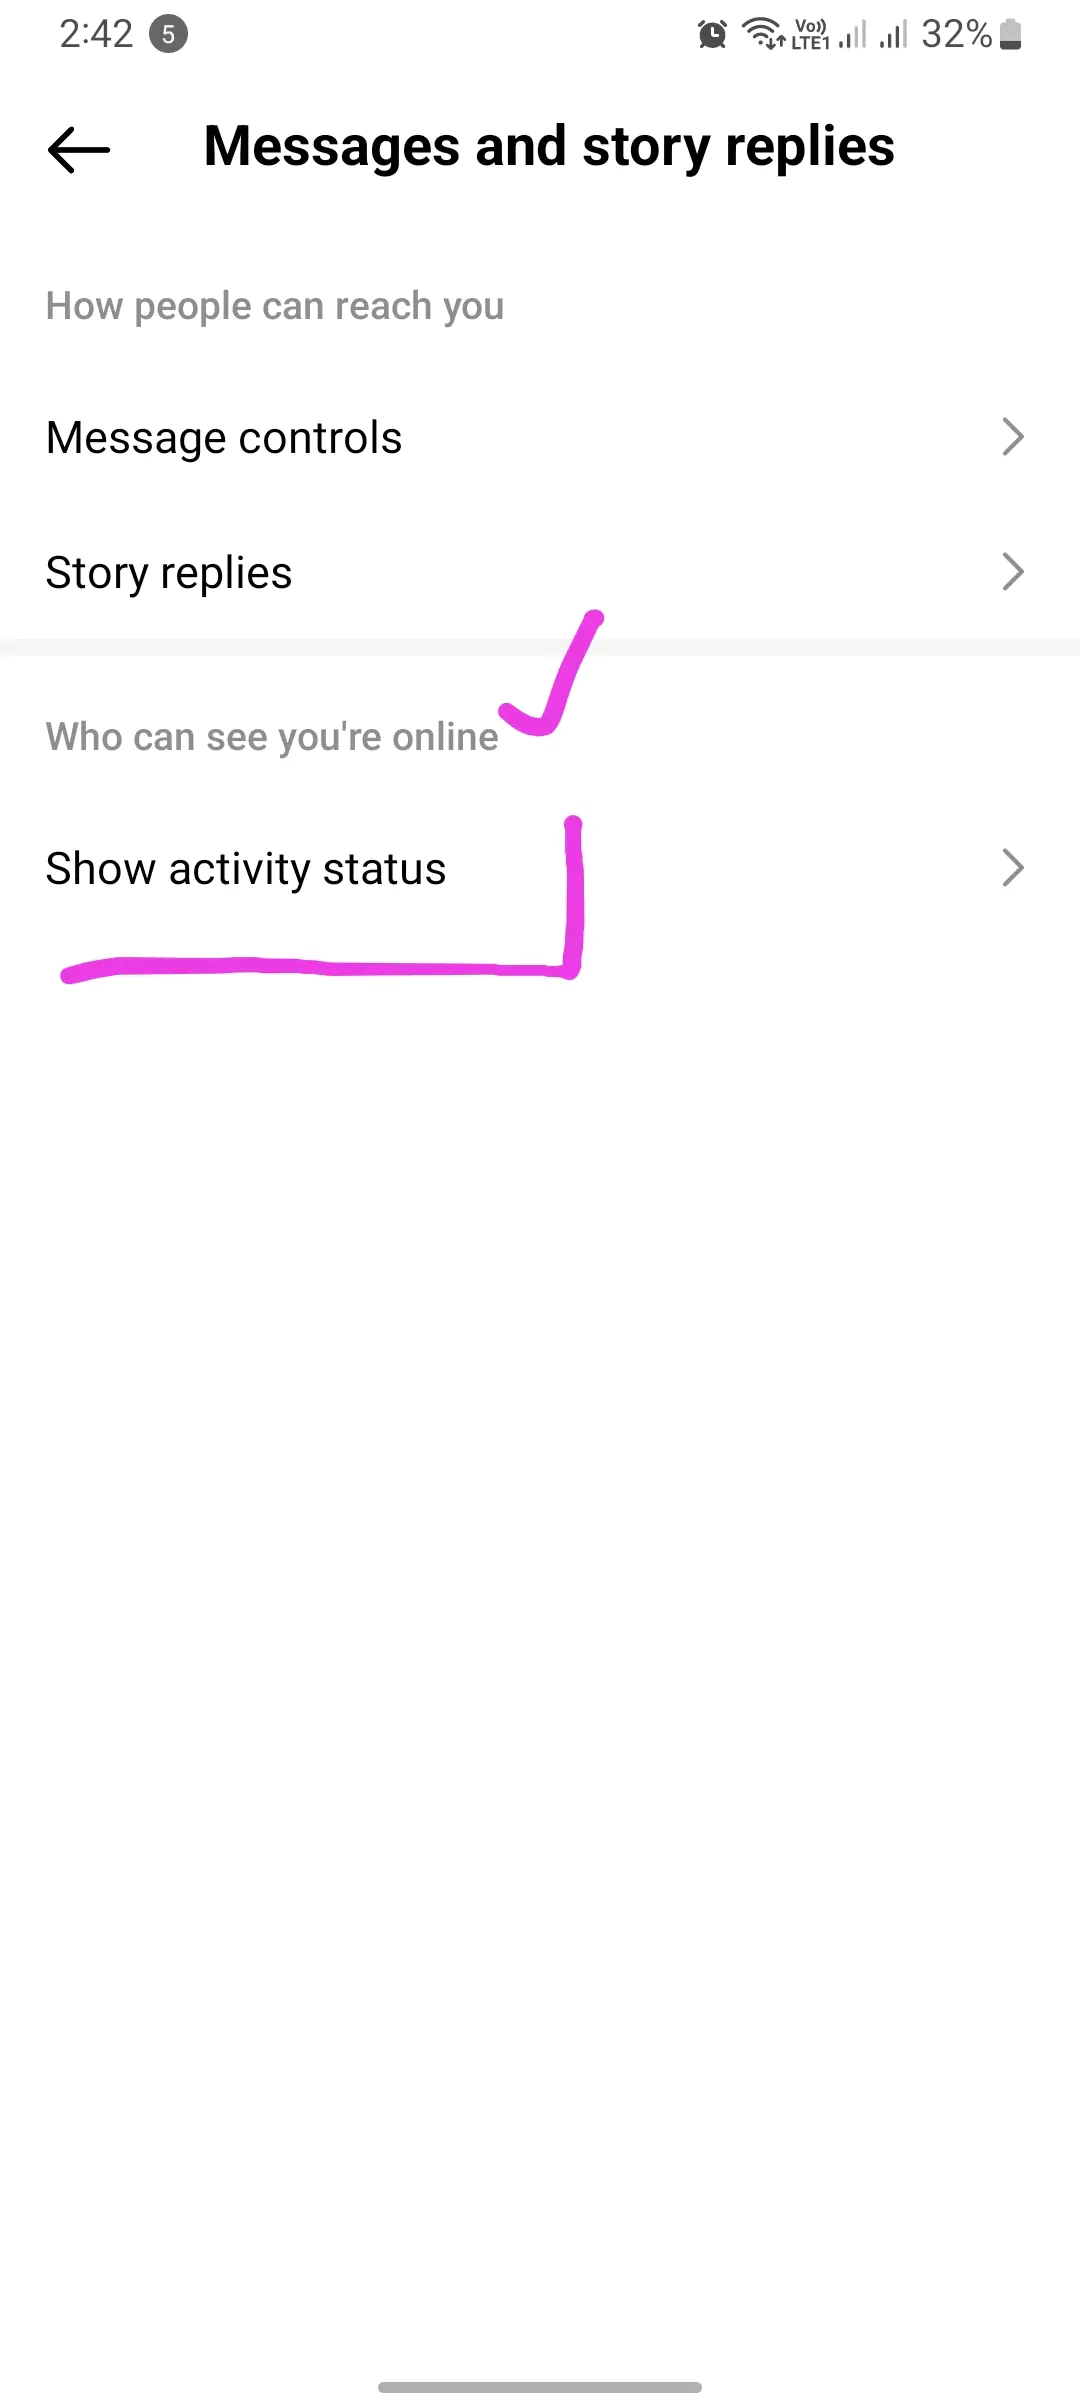 show activity status tab highlighted with menu